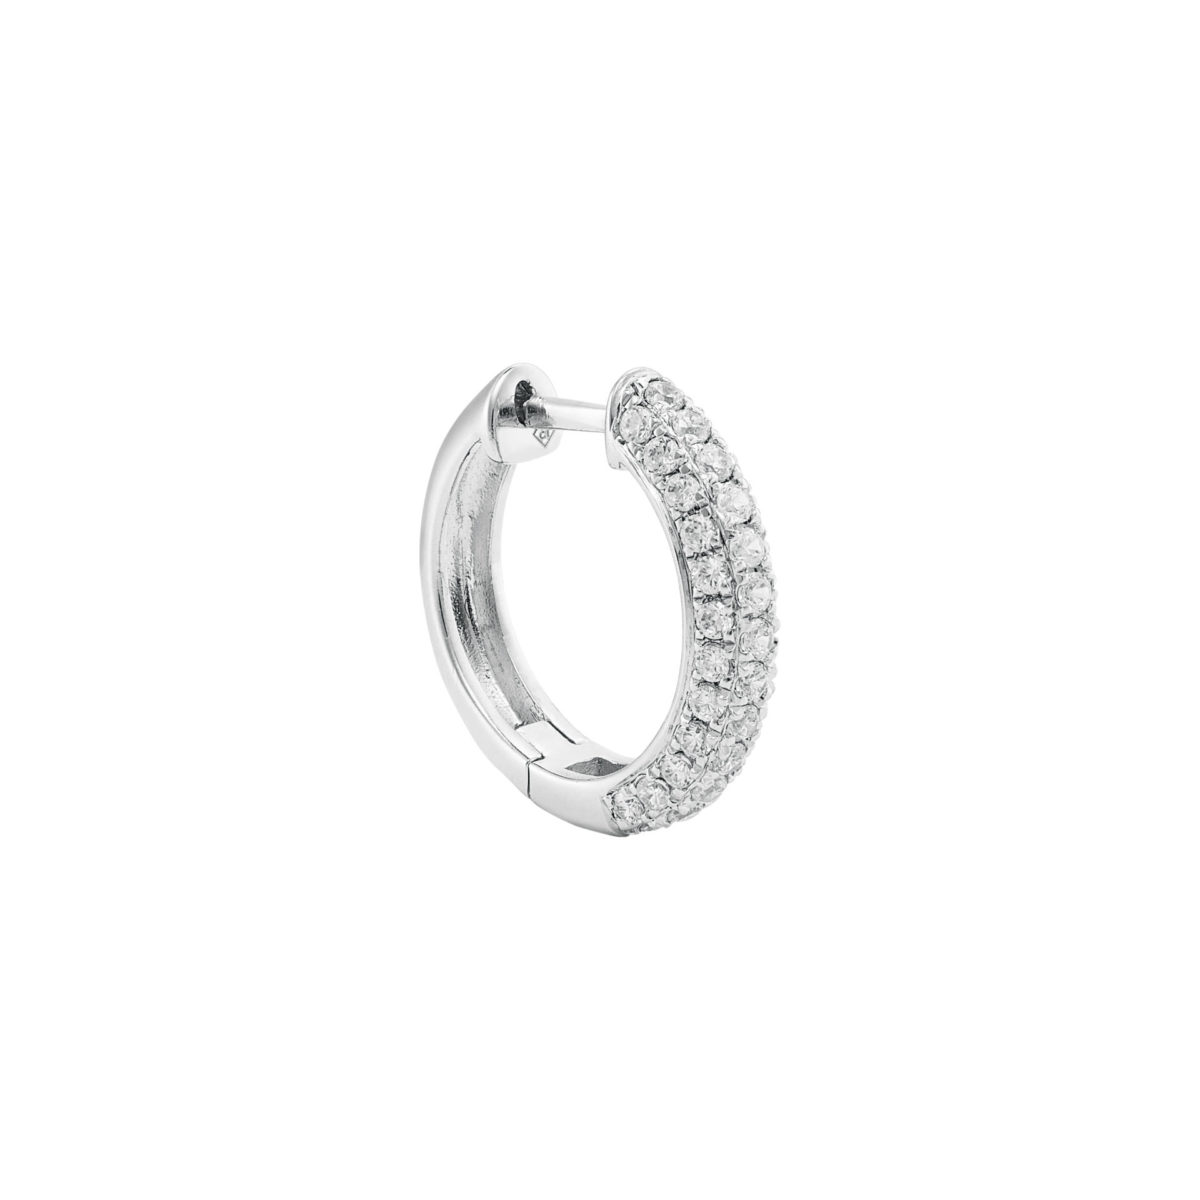 The Keepers - Eternal pave hoops small